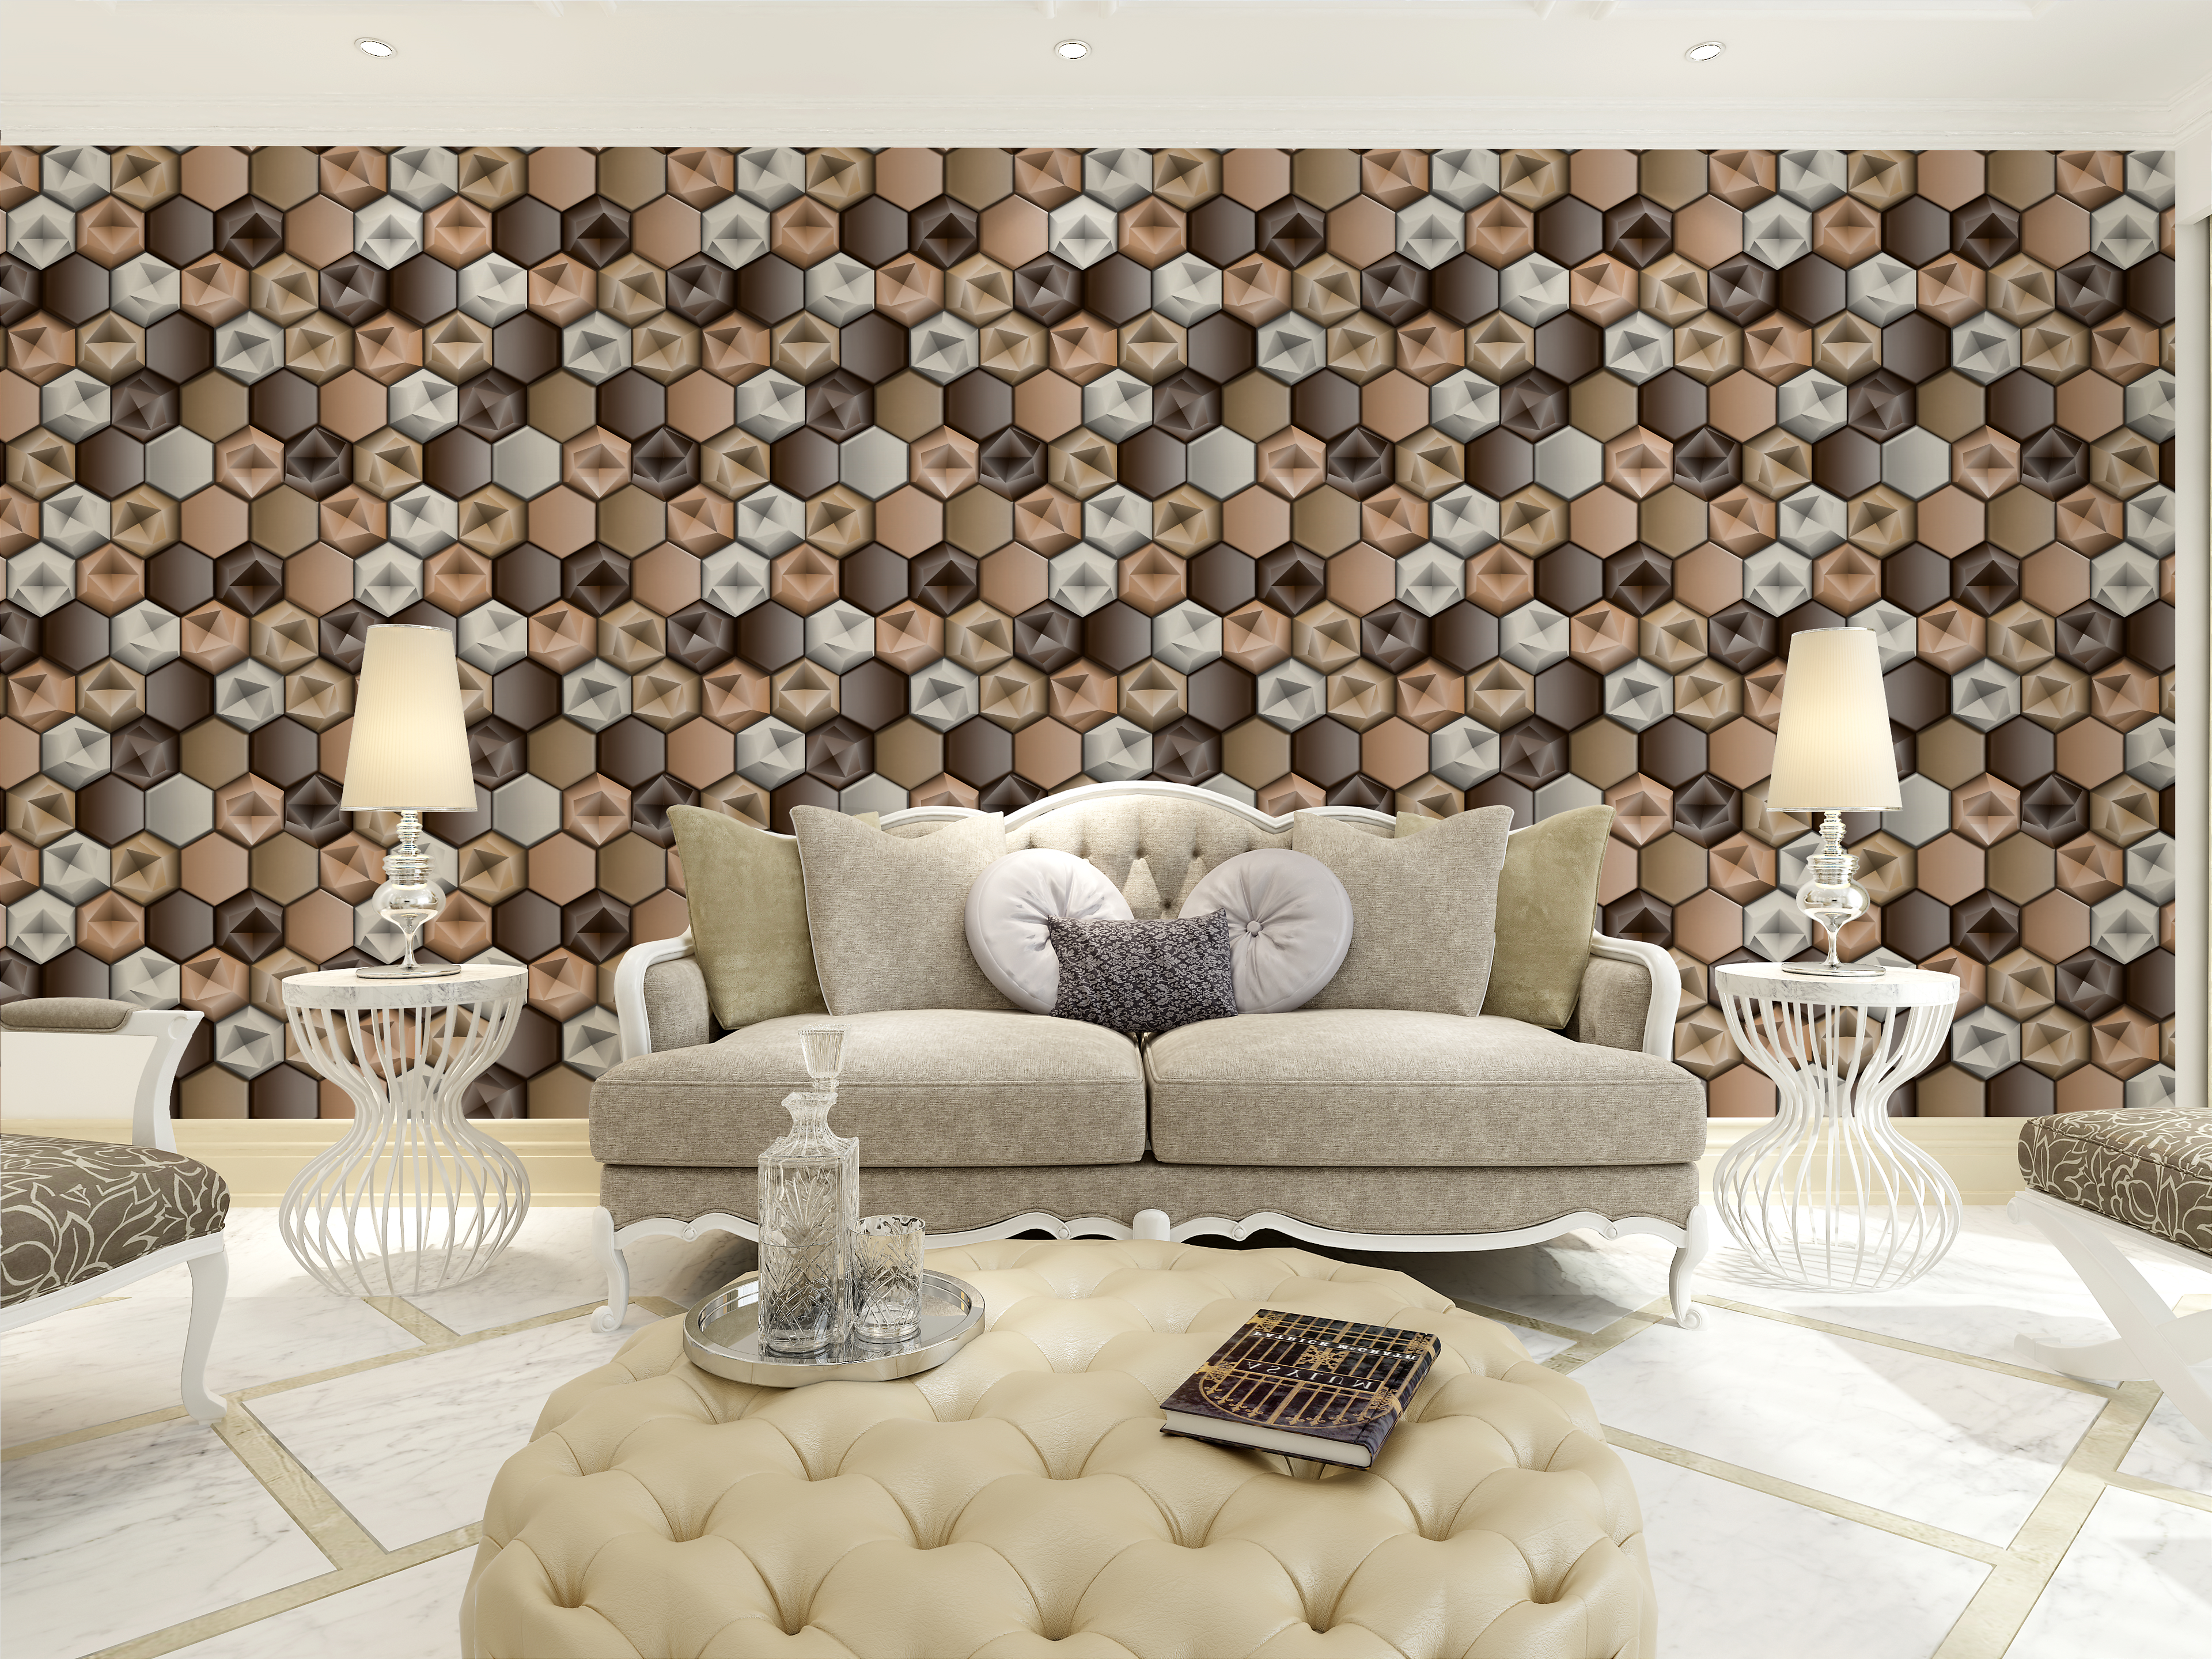 Eurotex Wallpaper For Living Room Bedroom Chocolate Brown